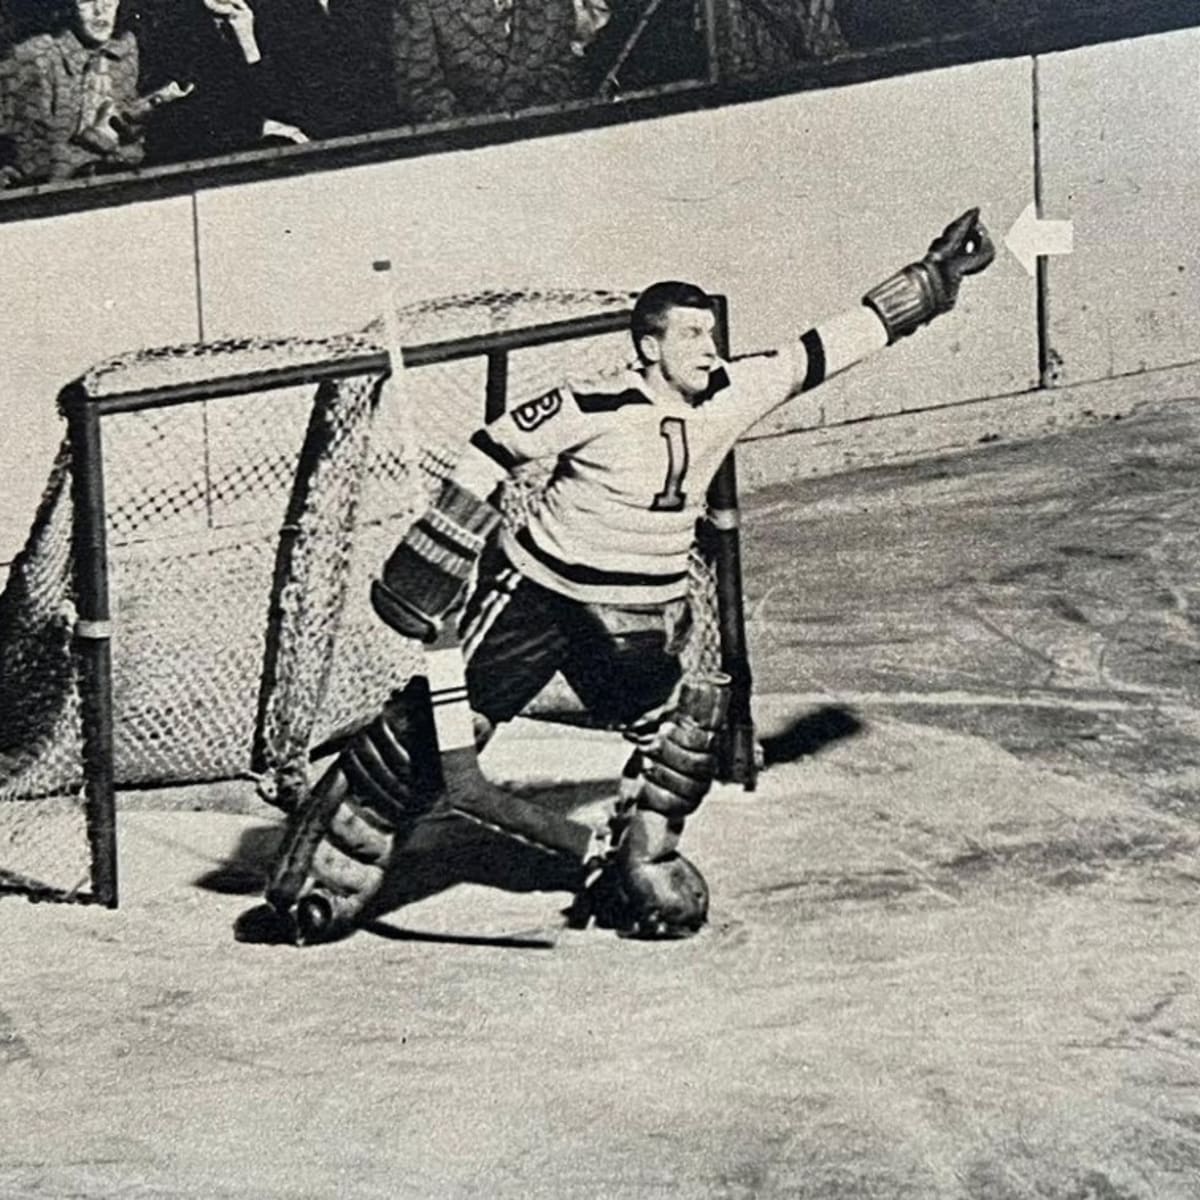 Bring Back the Stand-Up Goalies - by Stan Fischler